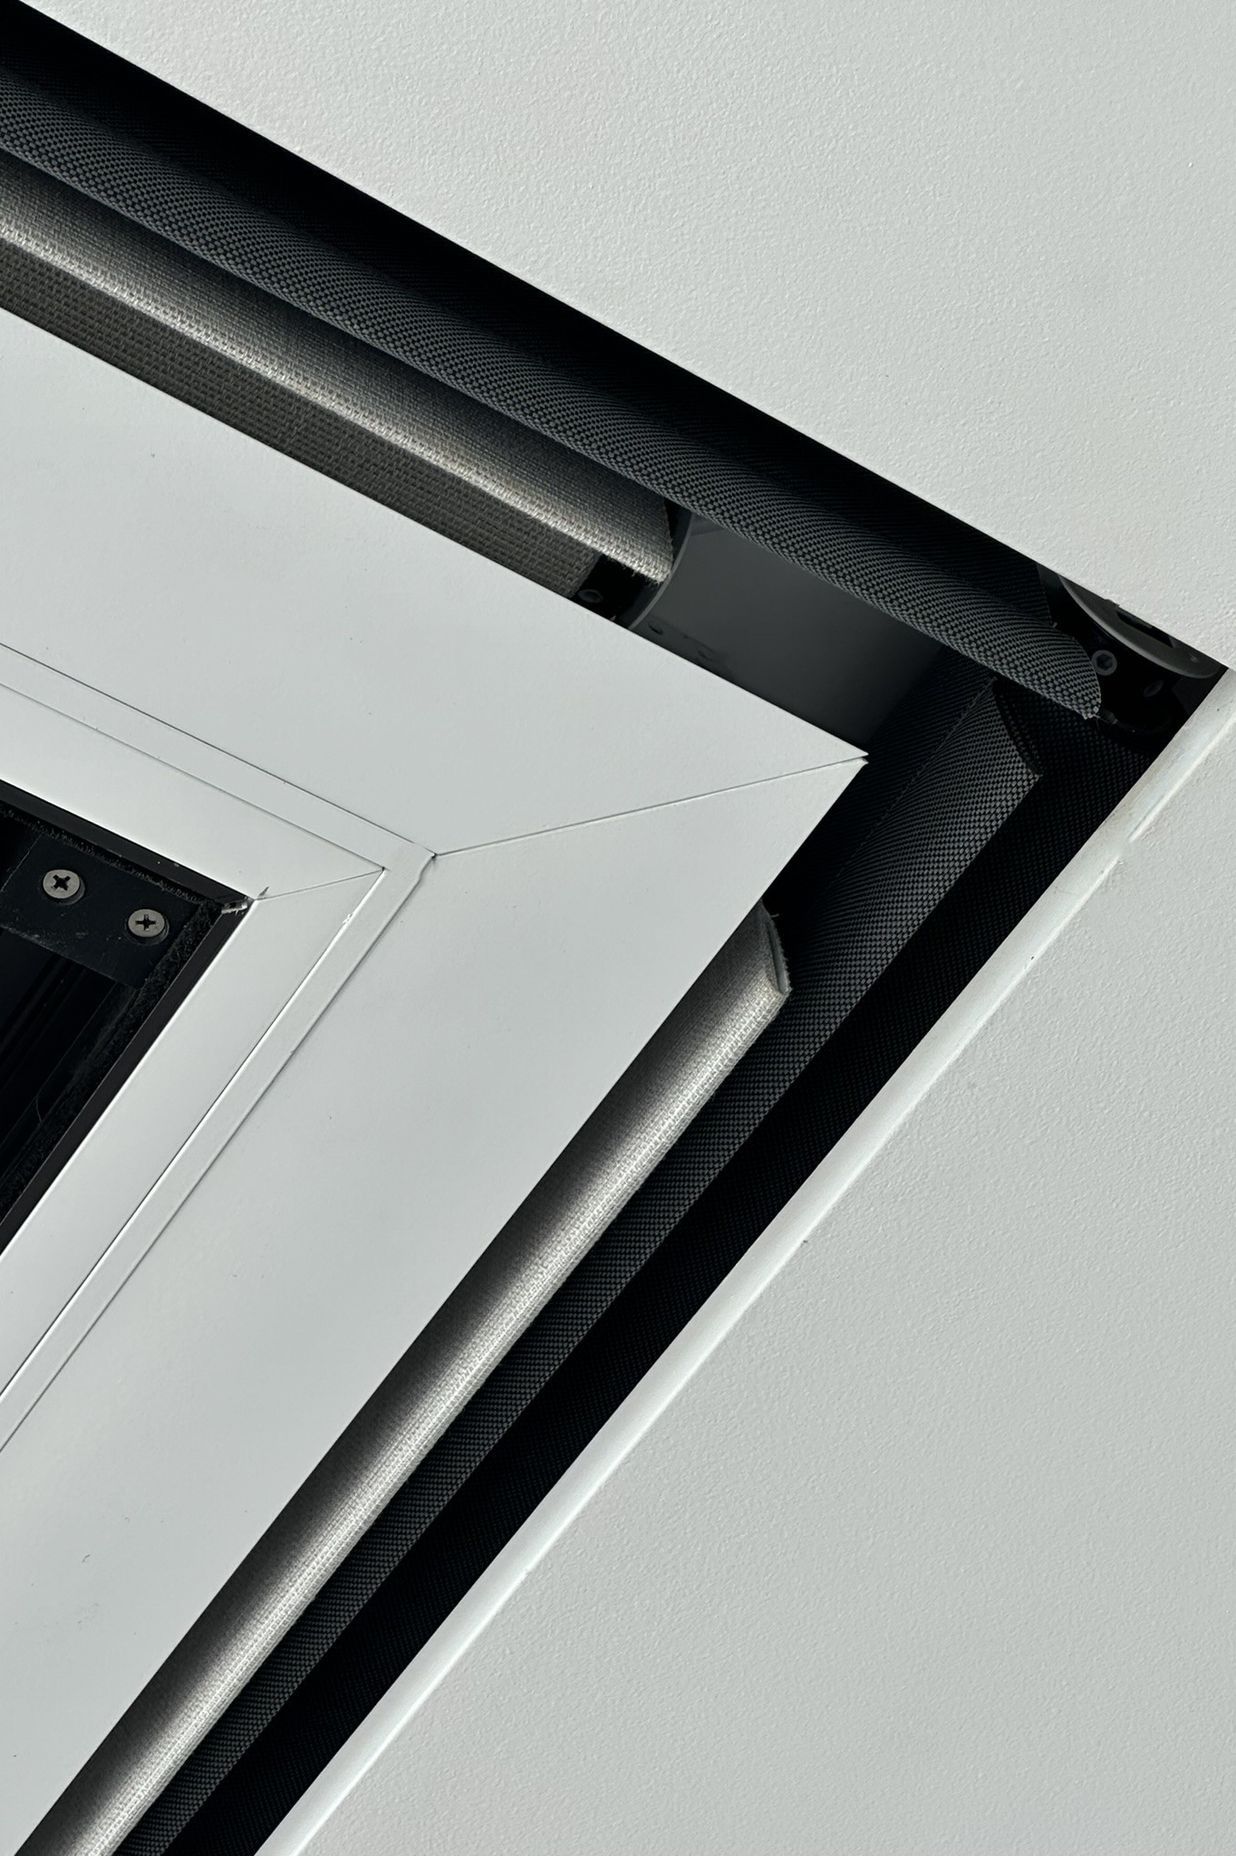 Recessed Flushboxes are integrated into the ceiling, creating a perfectly seamless space.